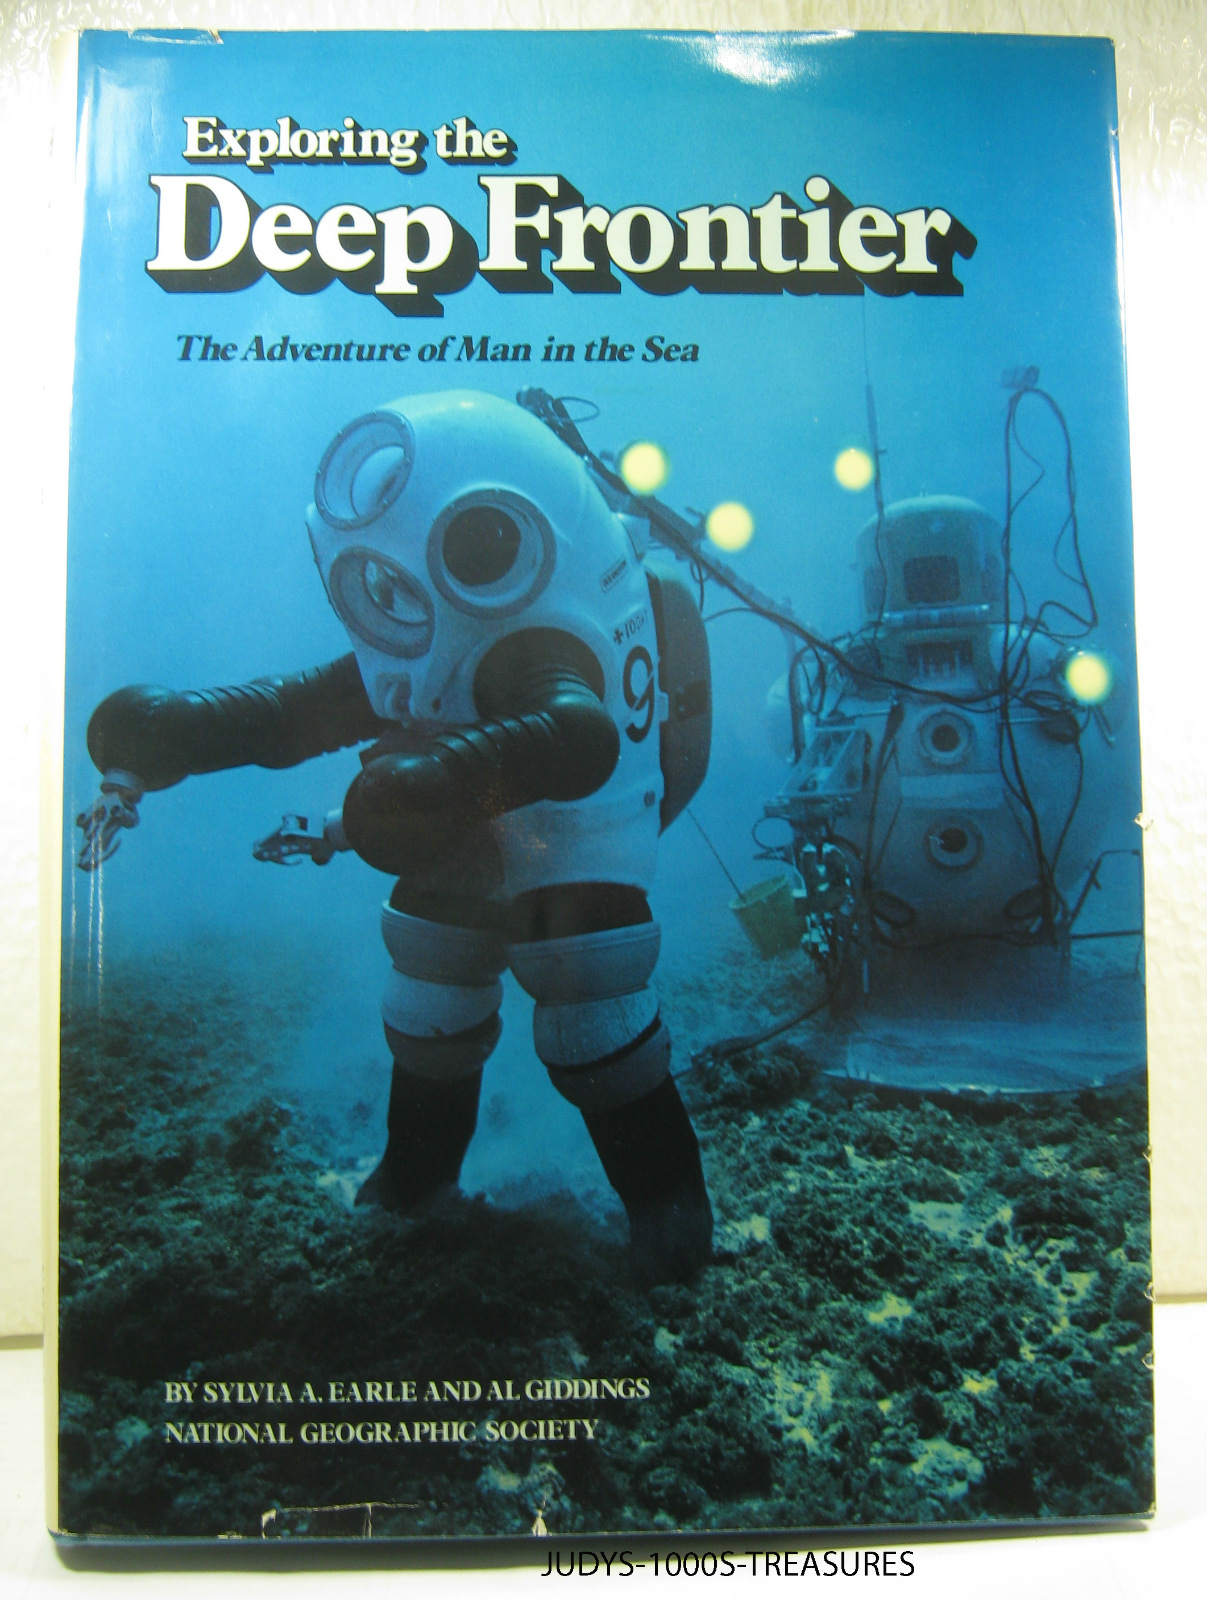 BOOK EXPLORING THE DEEP FRONTIER BY NAT GEO 12.75 x 9 INCHE 3-lb 12.2 ...